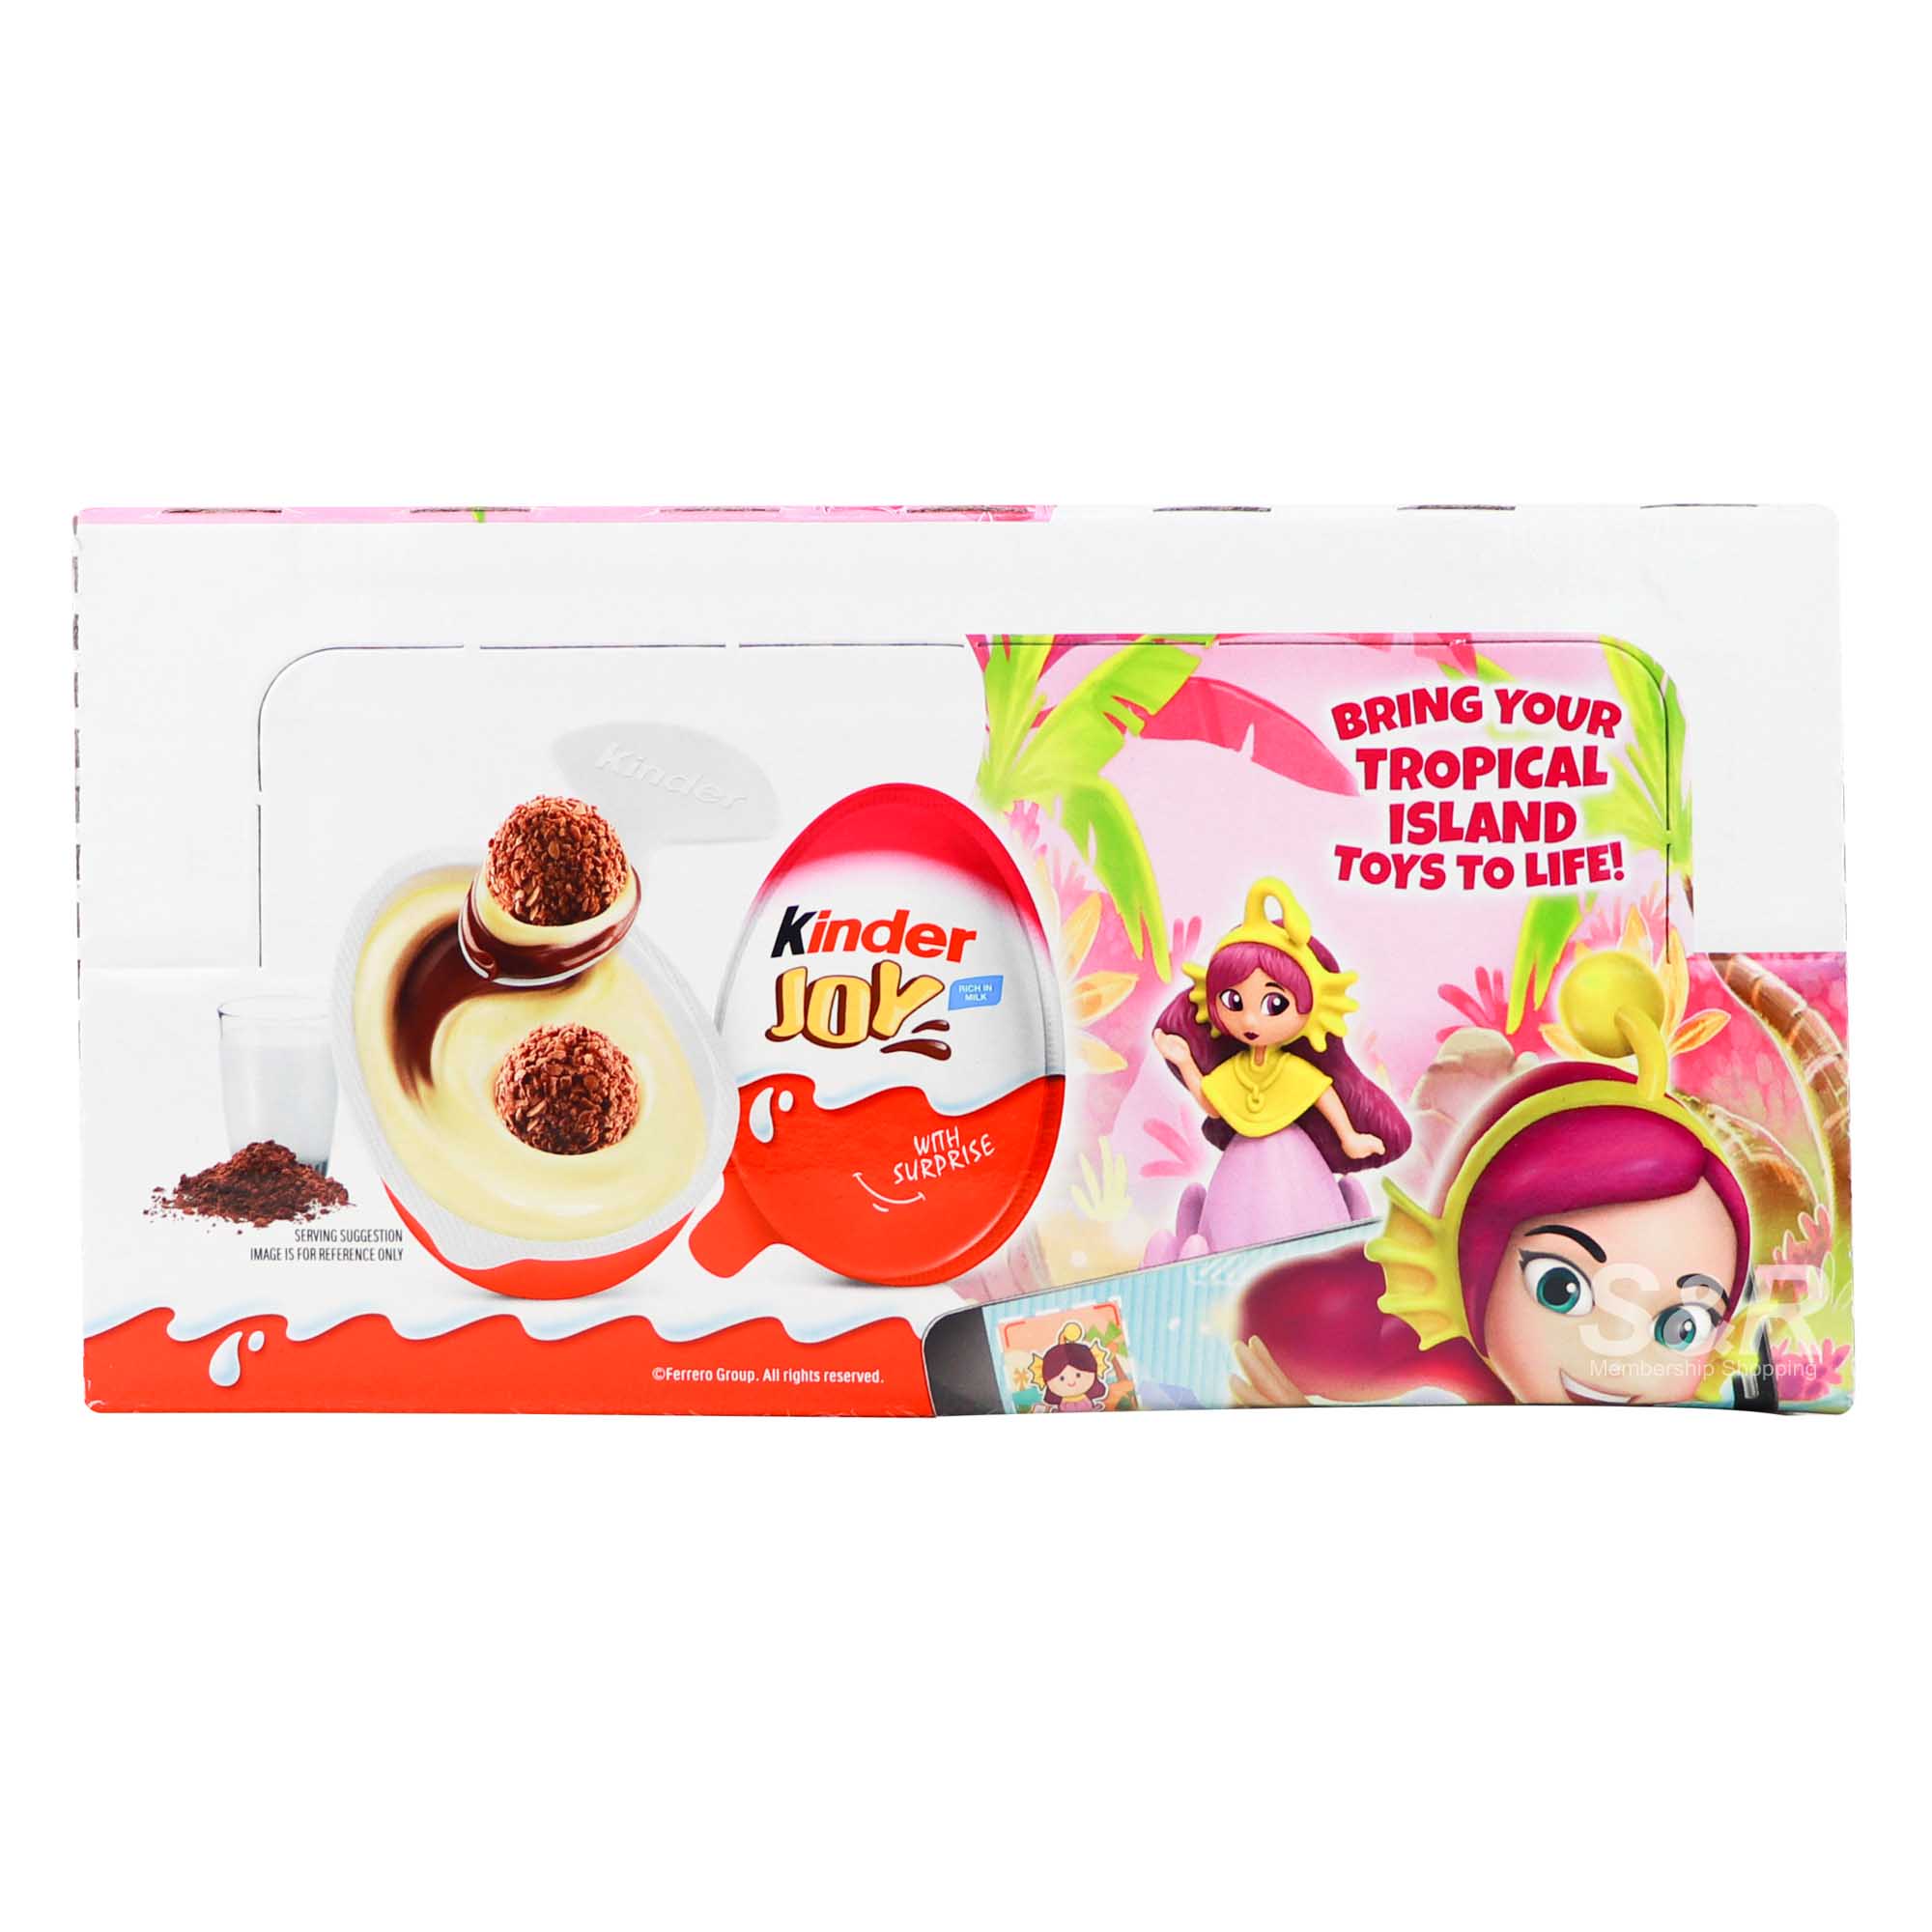 Kinder Joy with Surprise Toy 160g